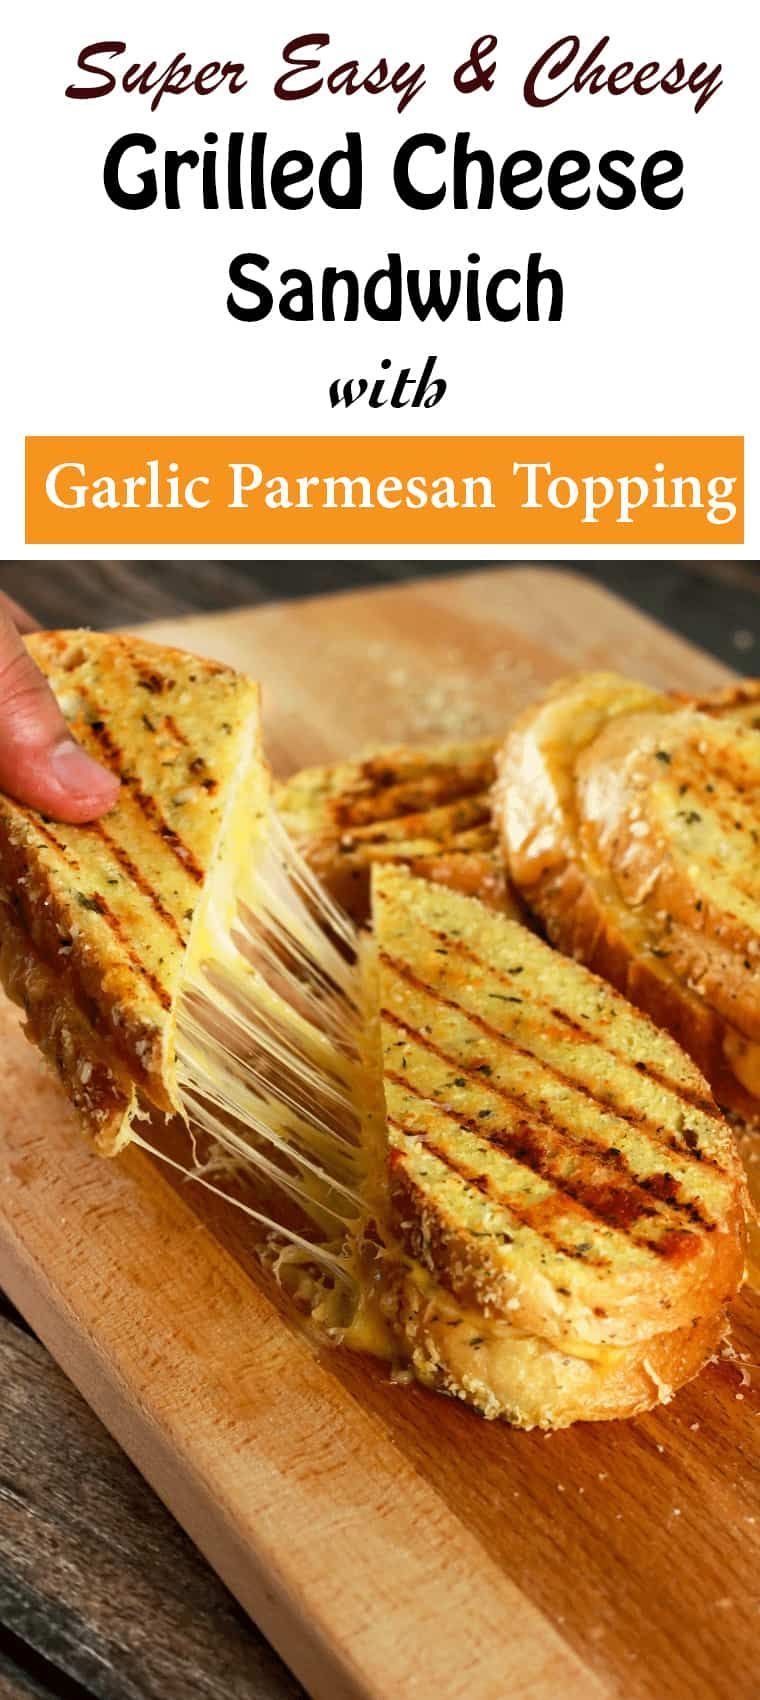 Grilled Cheese Sandwich with Garlic Parmesan Crust -   14 grilled sandwich recipes
 ideas